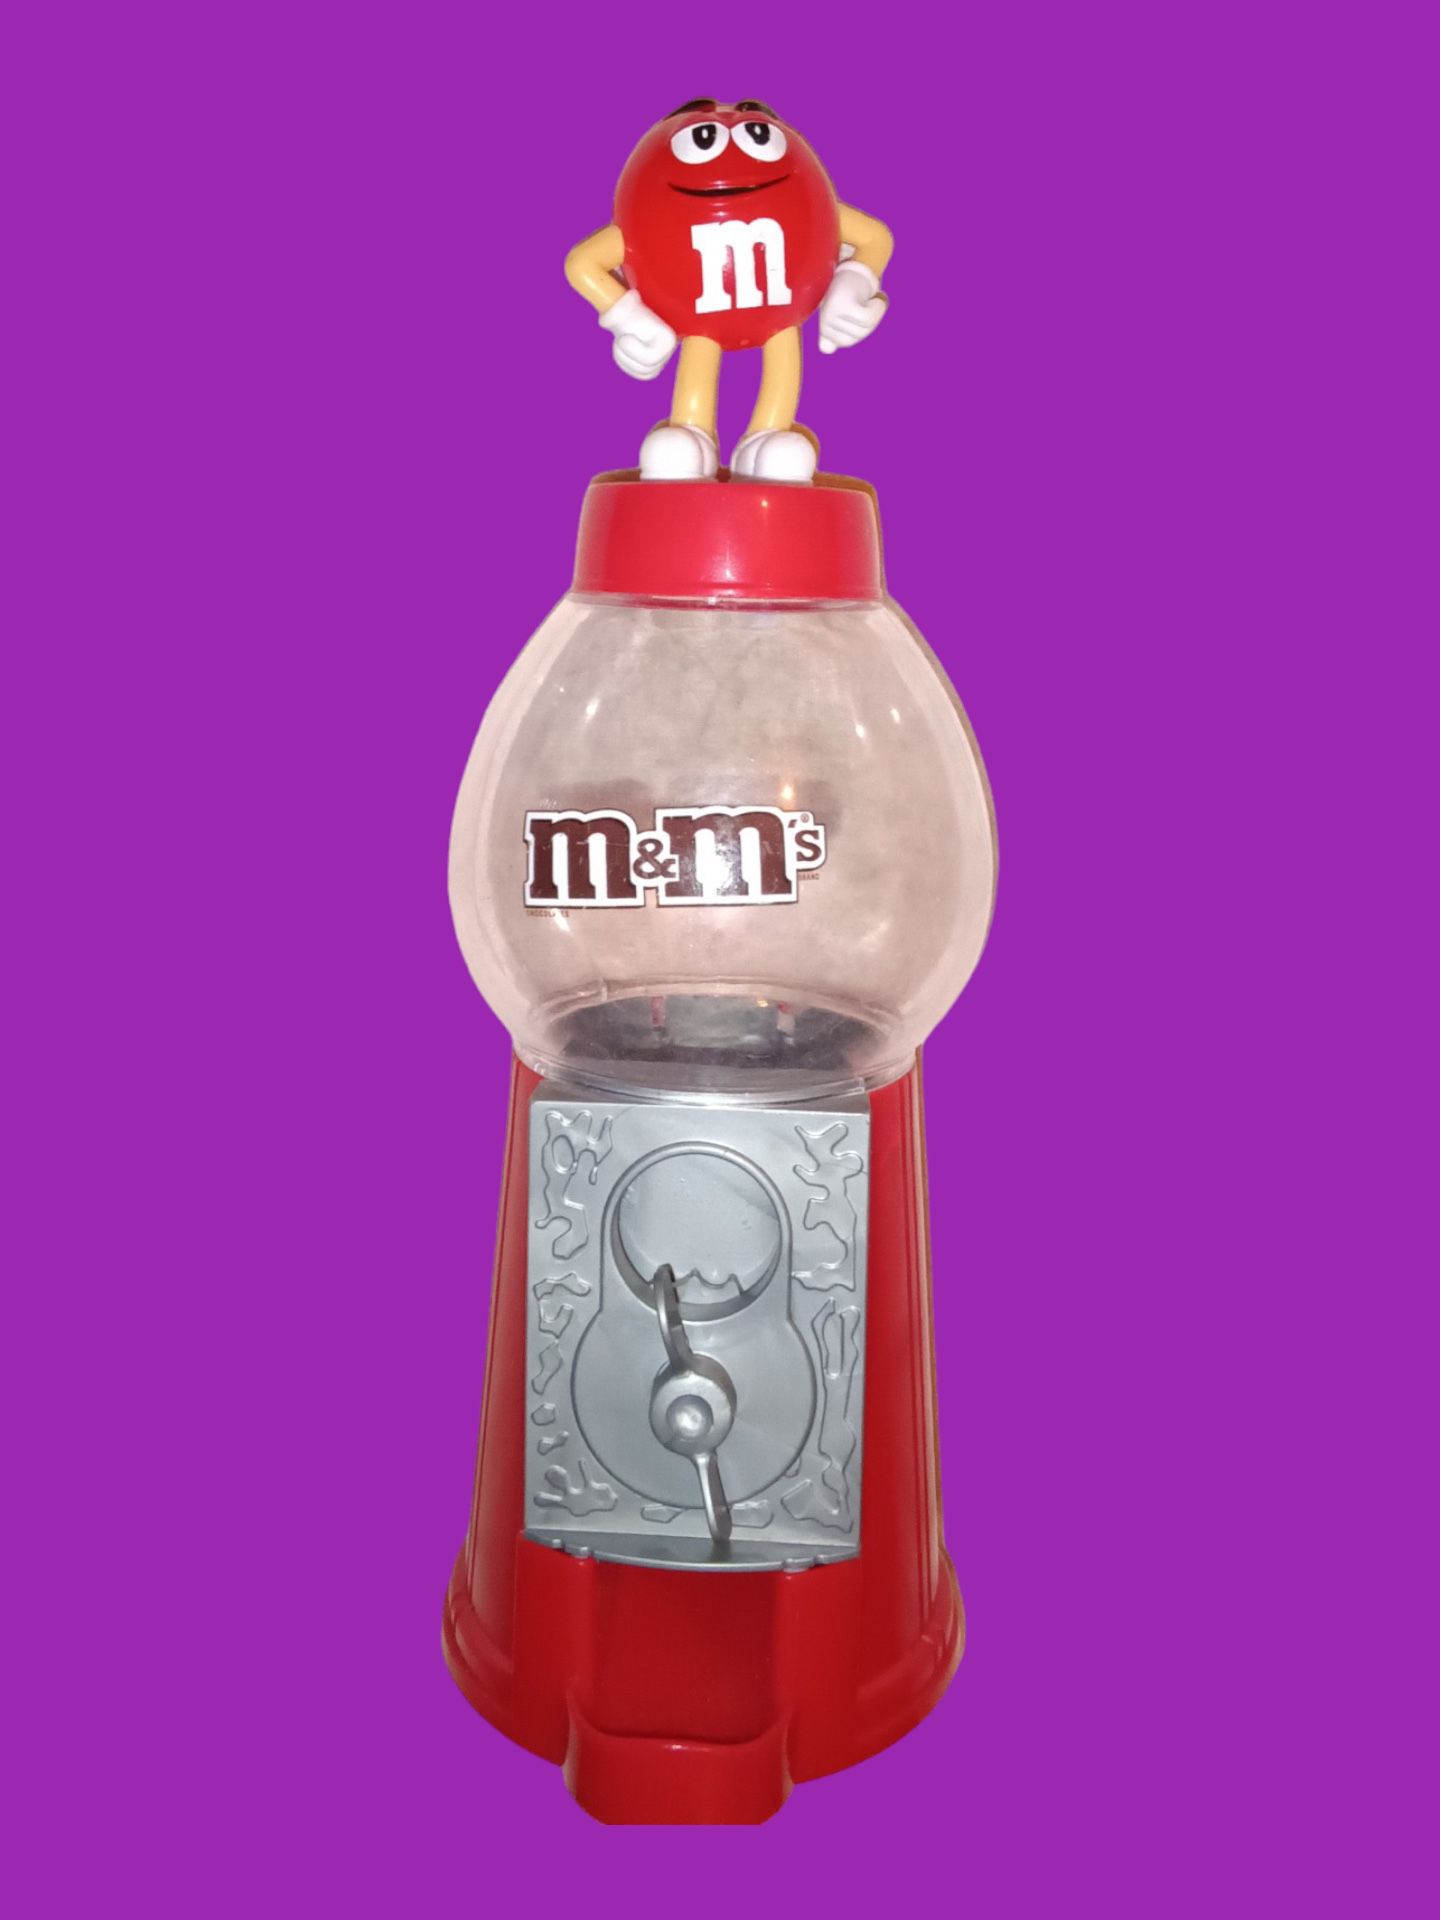 M&m Dispenser Candy Good Condition Small Size $10